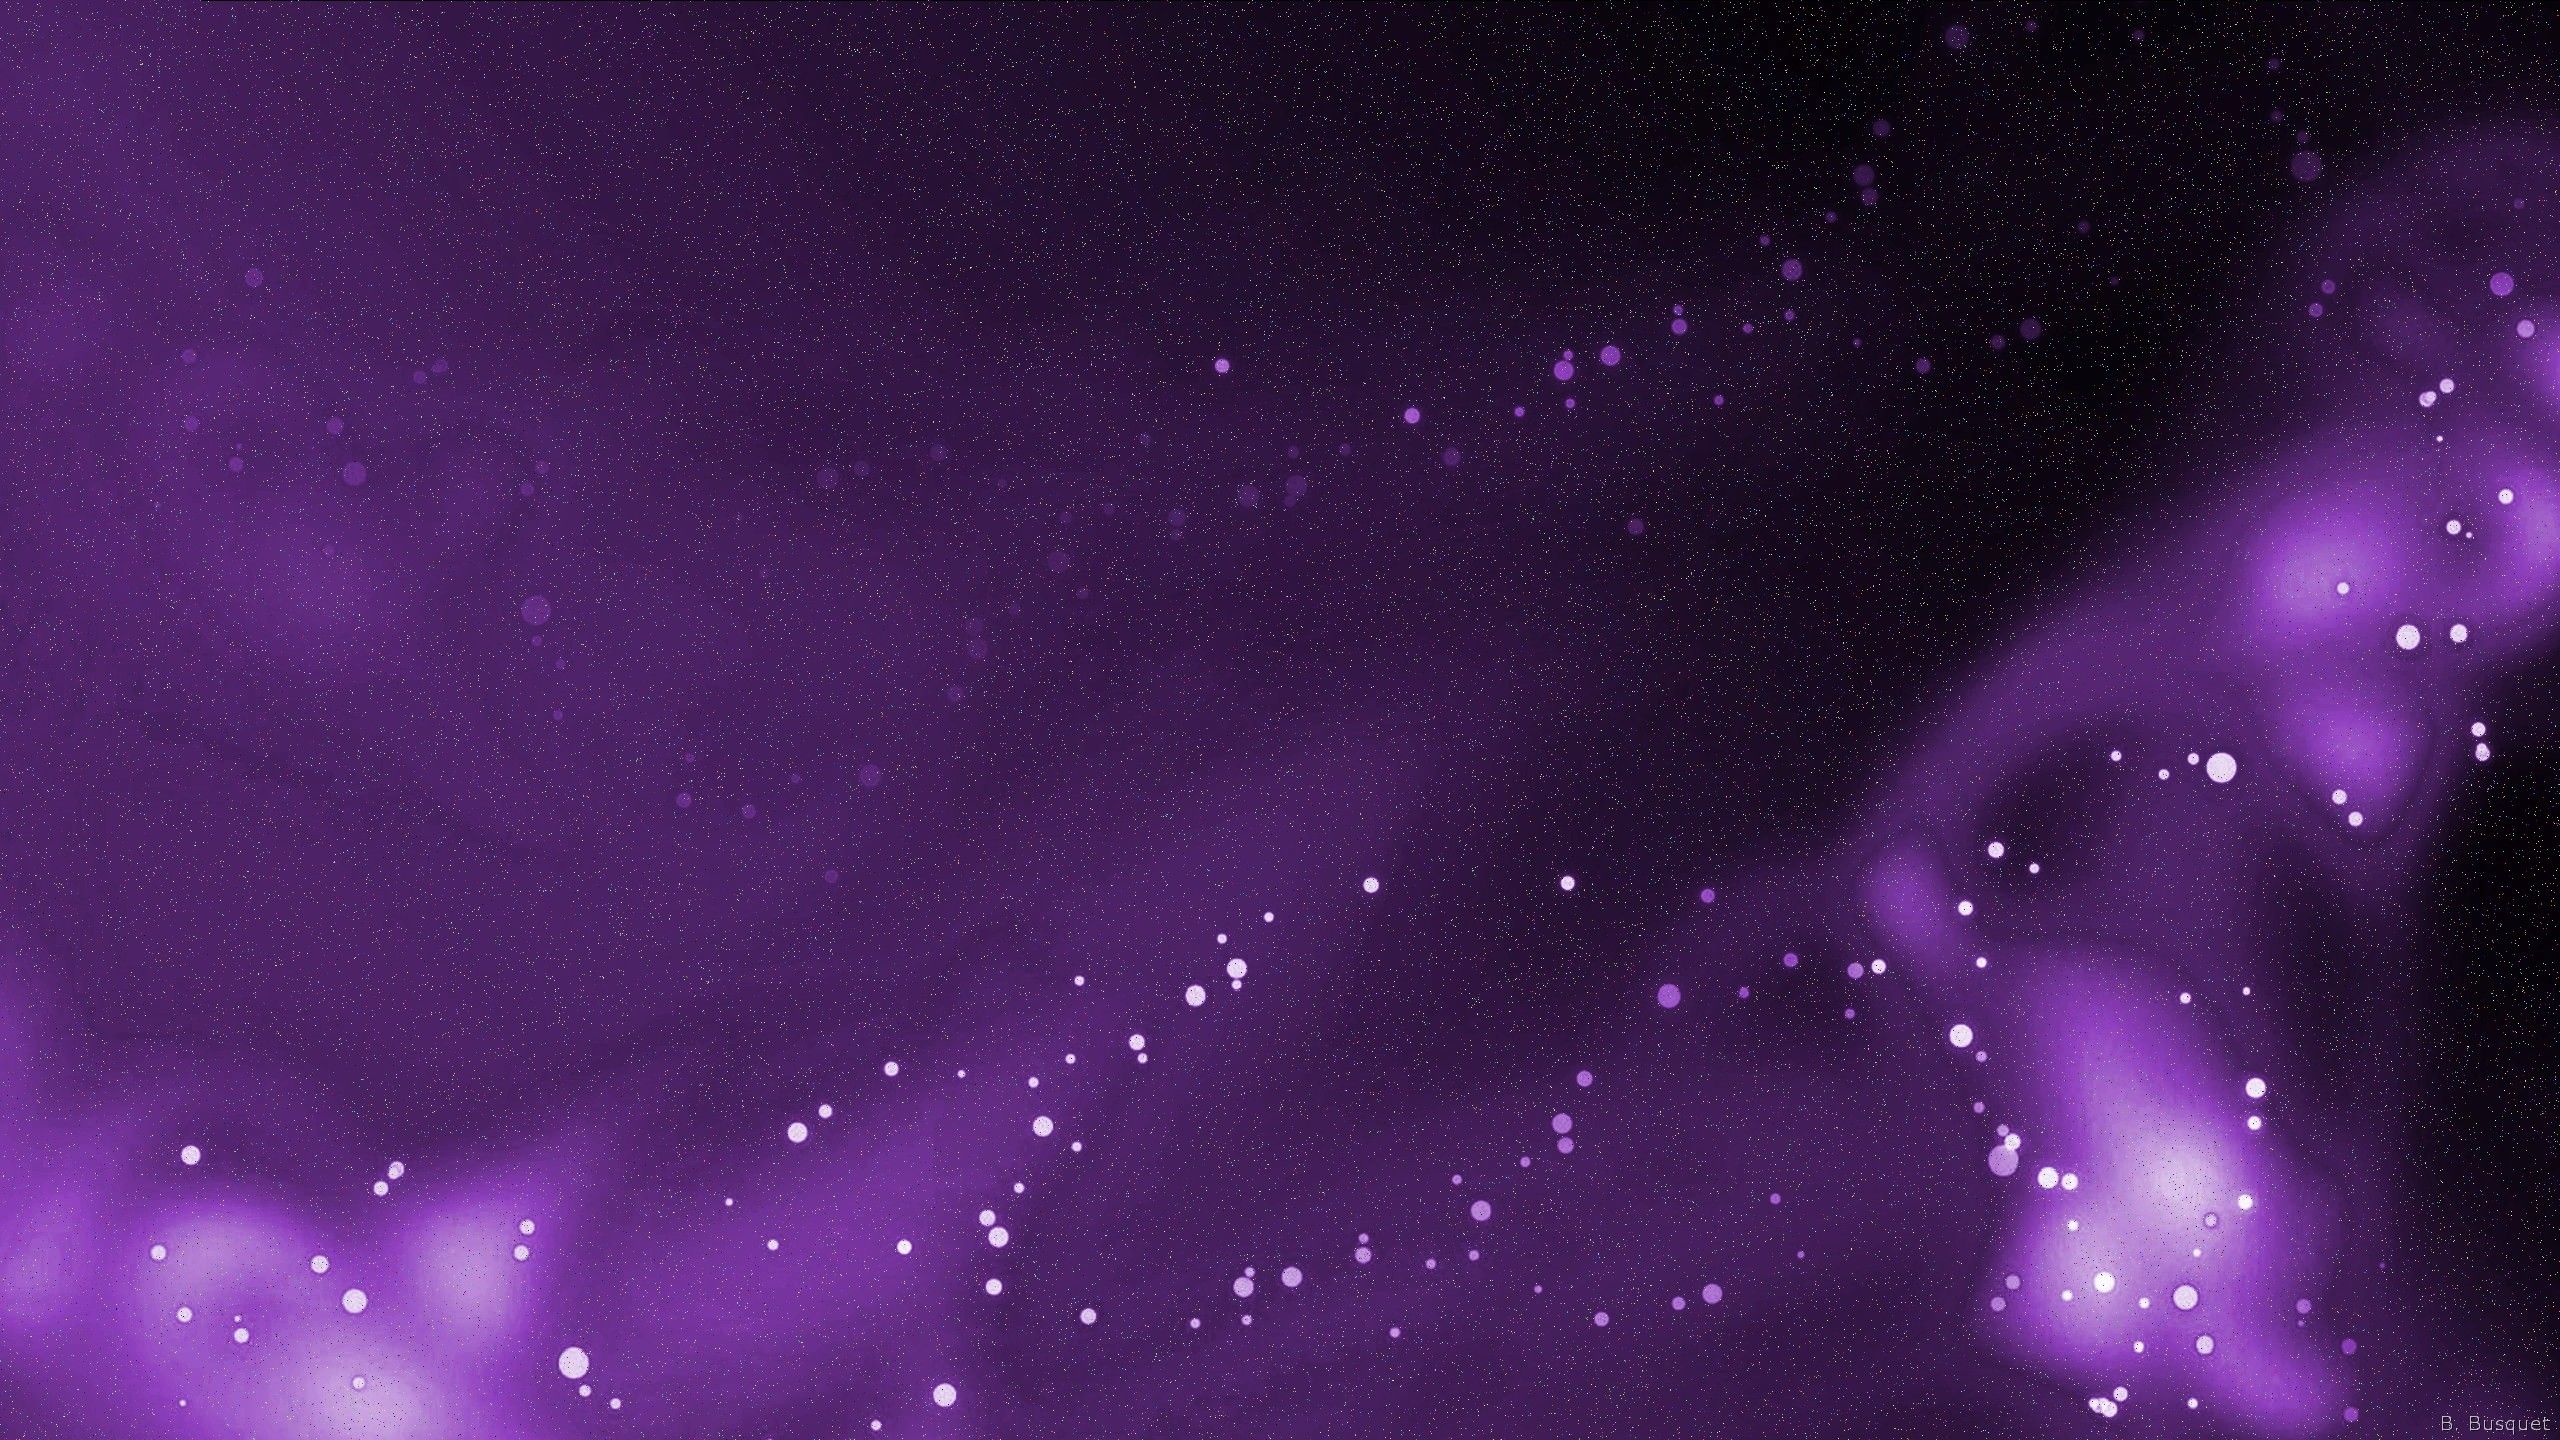 A purple and black wallpaper with stars - 2560x1440